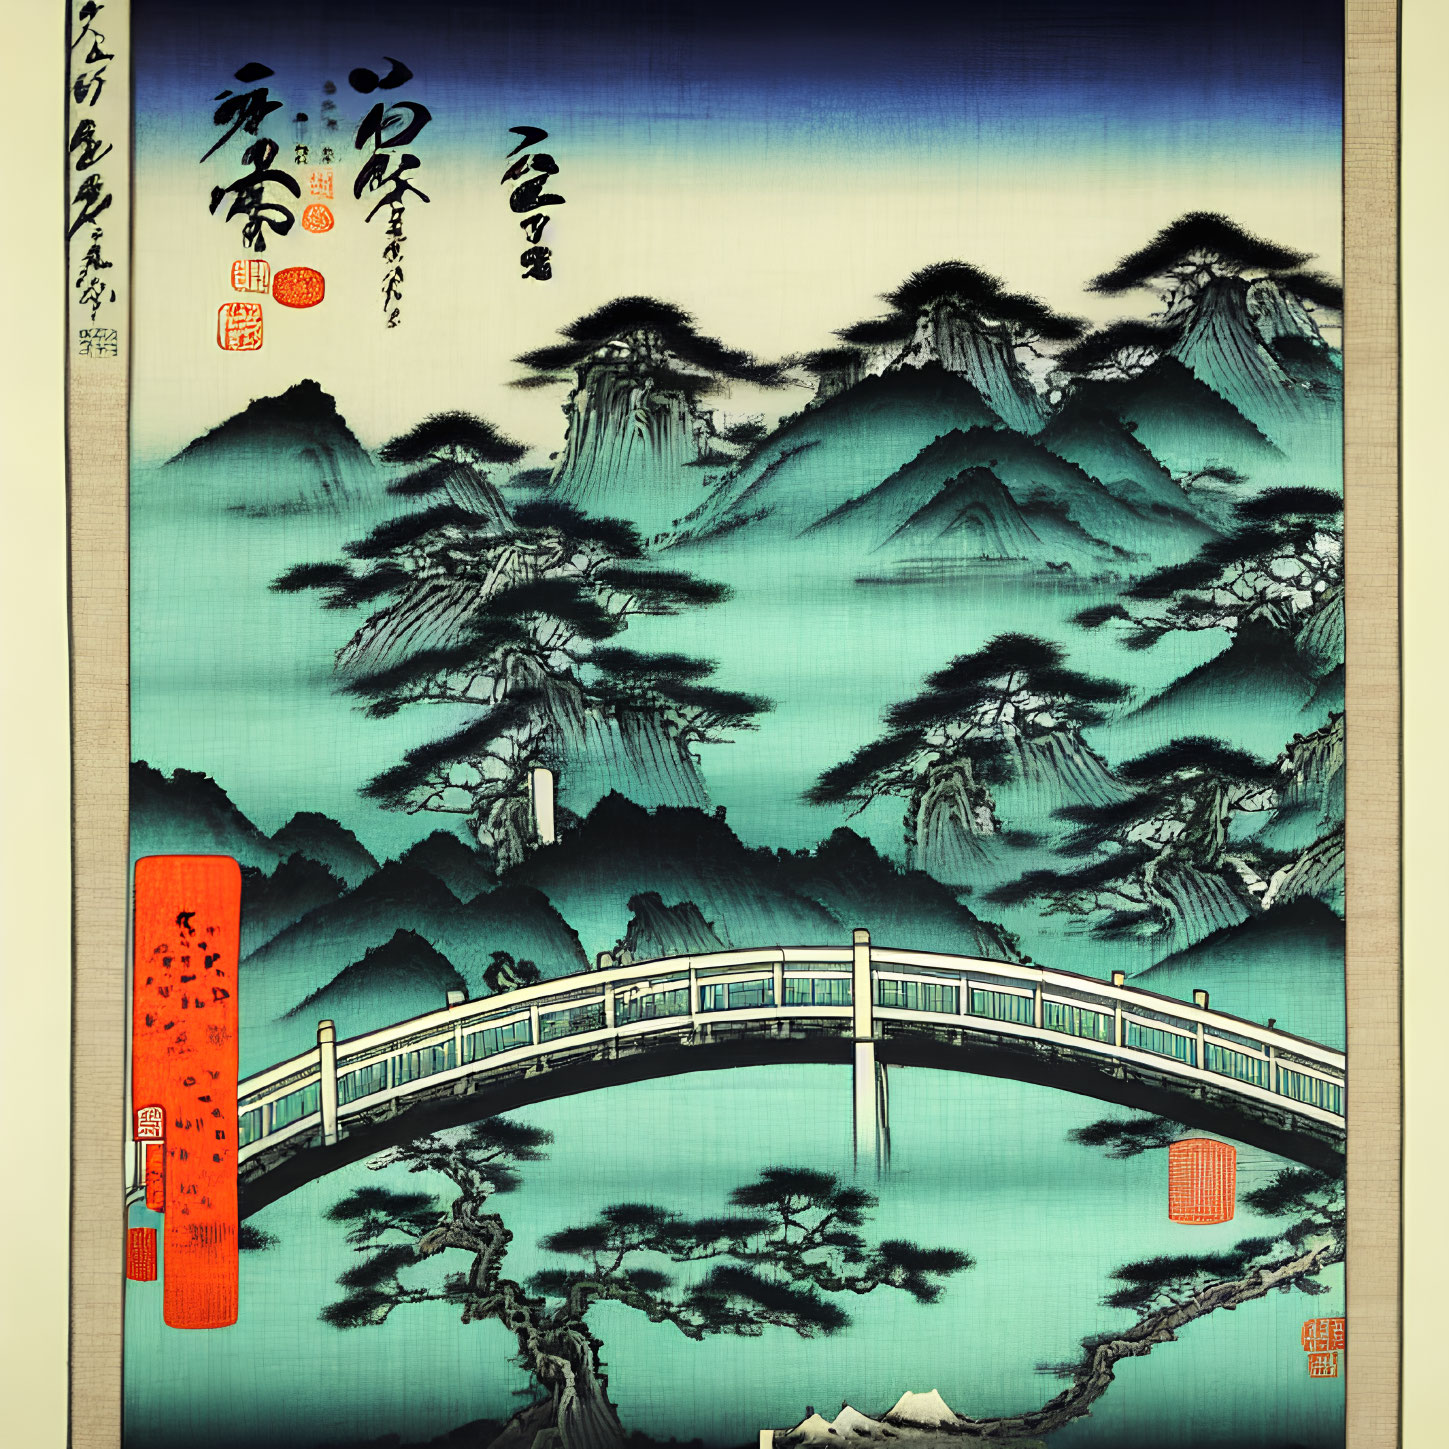 Asian Landscape Painting with Mountains, Trees, Bridge, and Calligraphy